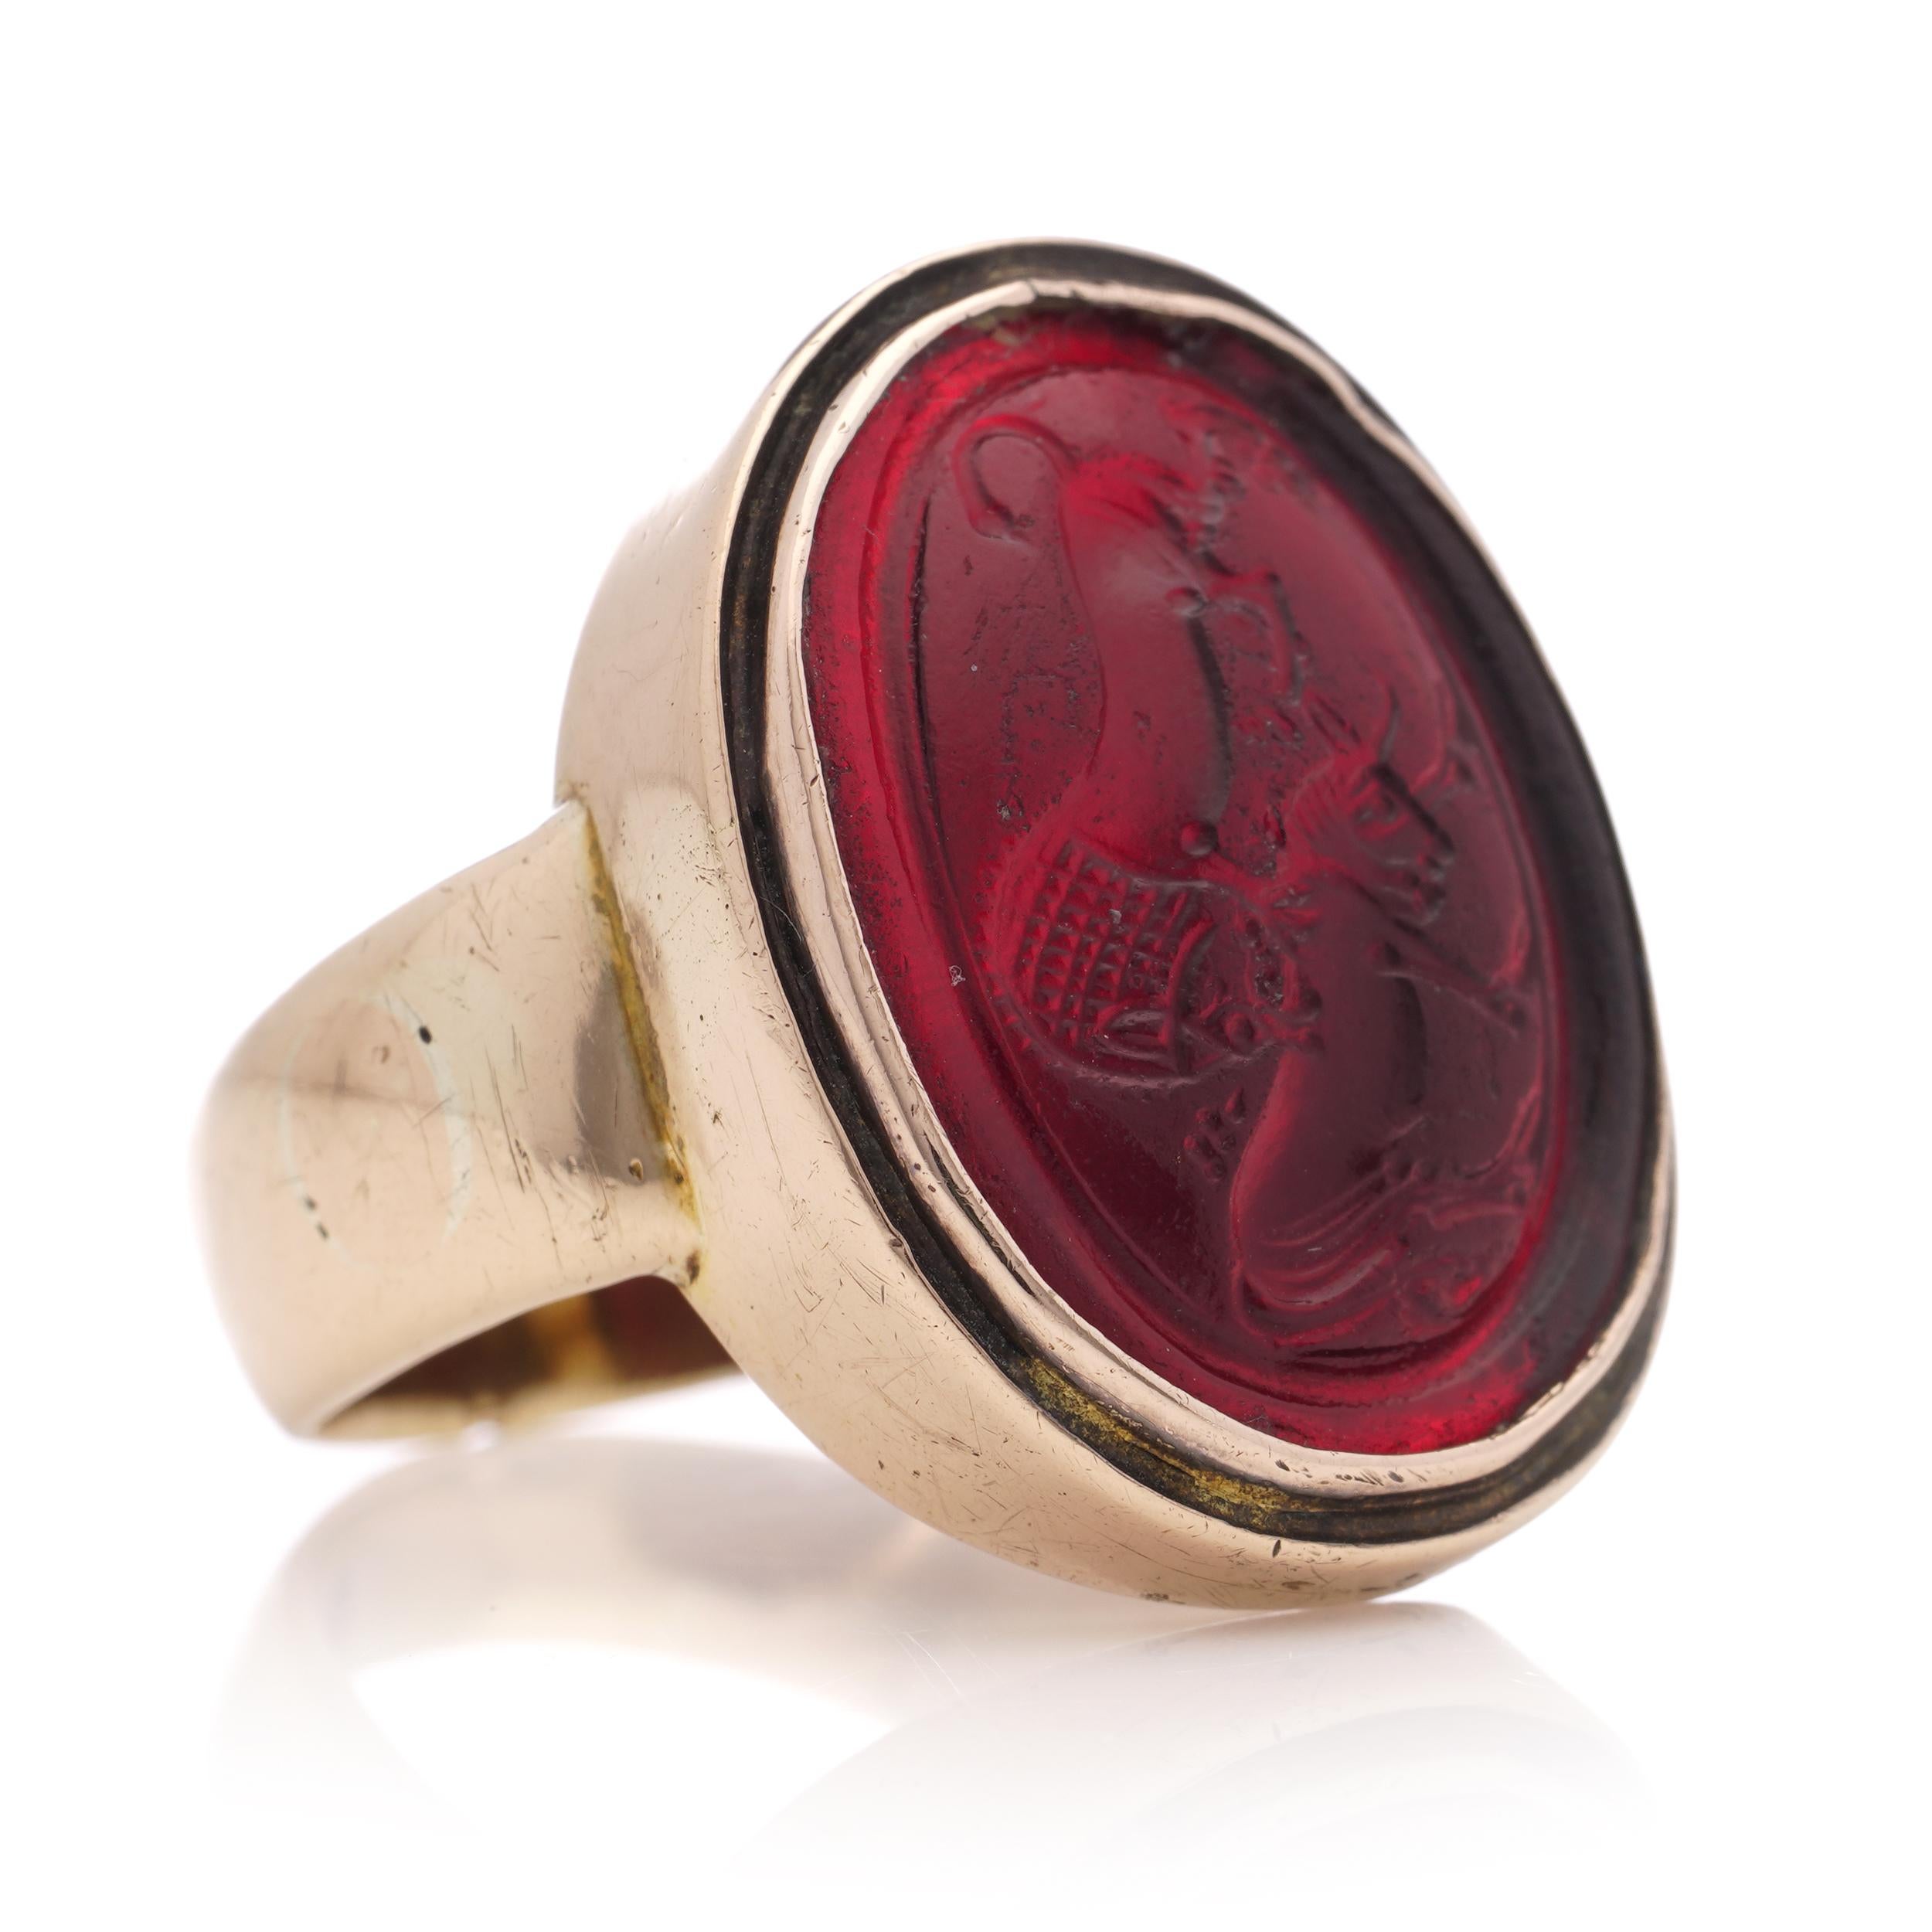 Antique 19th Century 14kt. rose gold red pique glass intaglio, featuring a lion attacking horned animal. 
X-Ray tested positive for 14kt. gold. 

Dimensions - 
Ring Size (UK) = N(EU) = 55 (US) = 7 
Ring size: 2.2 x 2 x 0.7 cm 
Weight: 9.00